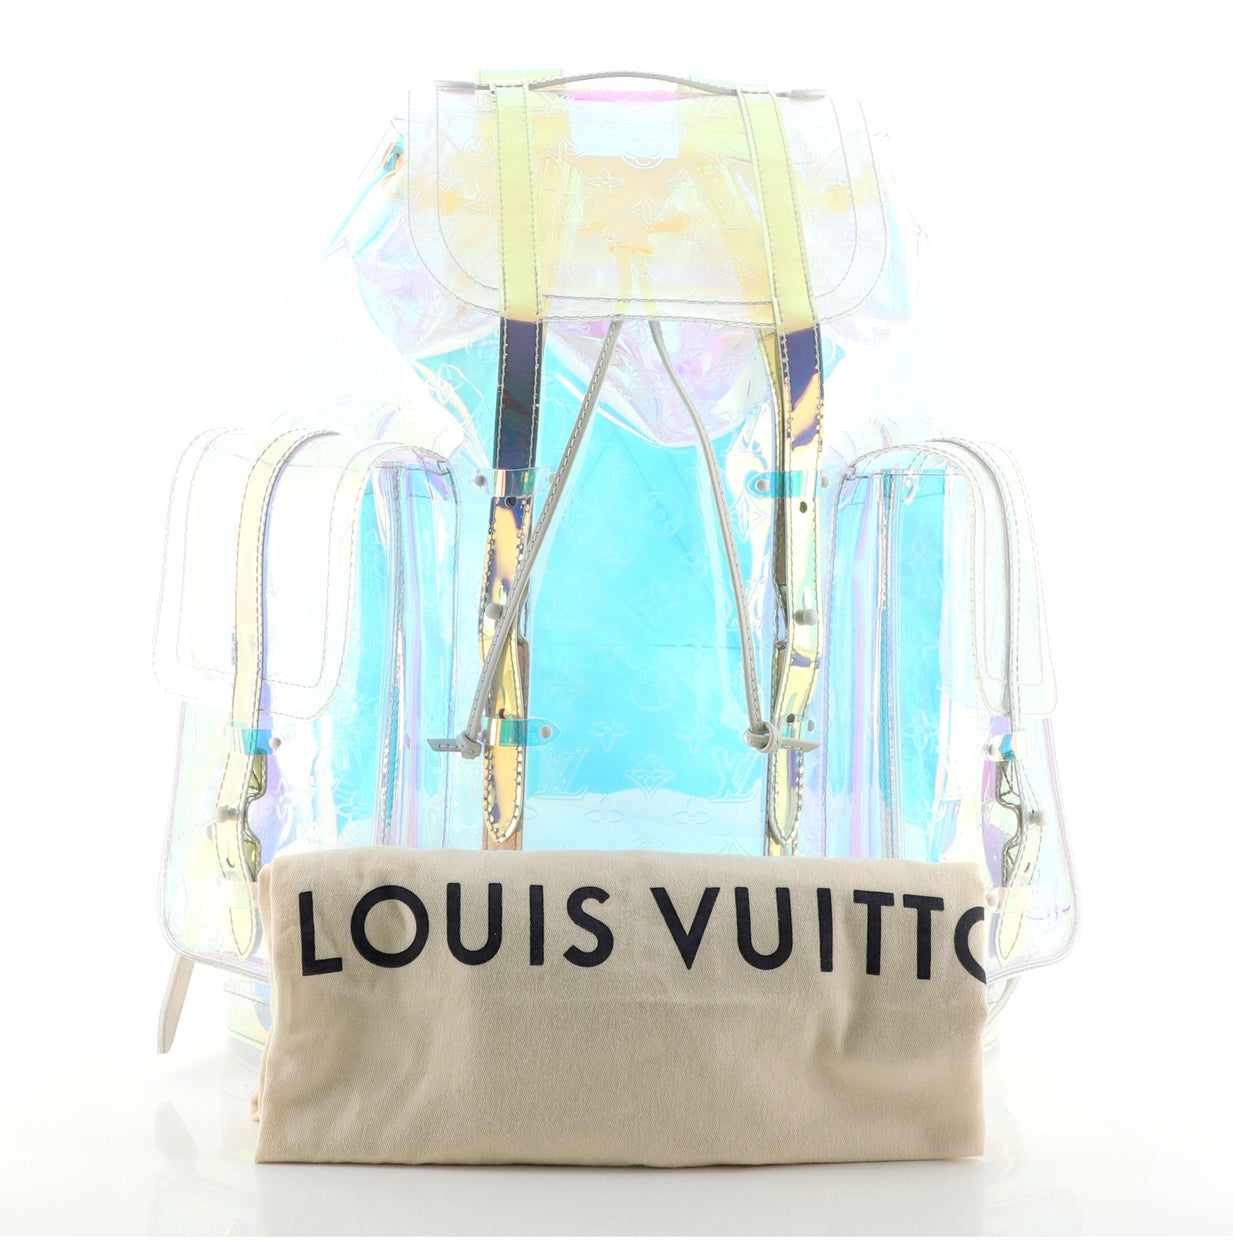 A LIMITED EDITION IRIDESCENT MONOGRAM PVC PRISM CHRISTOPHER GM BACKPACK BY VIRGIL  ABLOH, LOUIS VUITTON, 2019